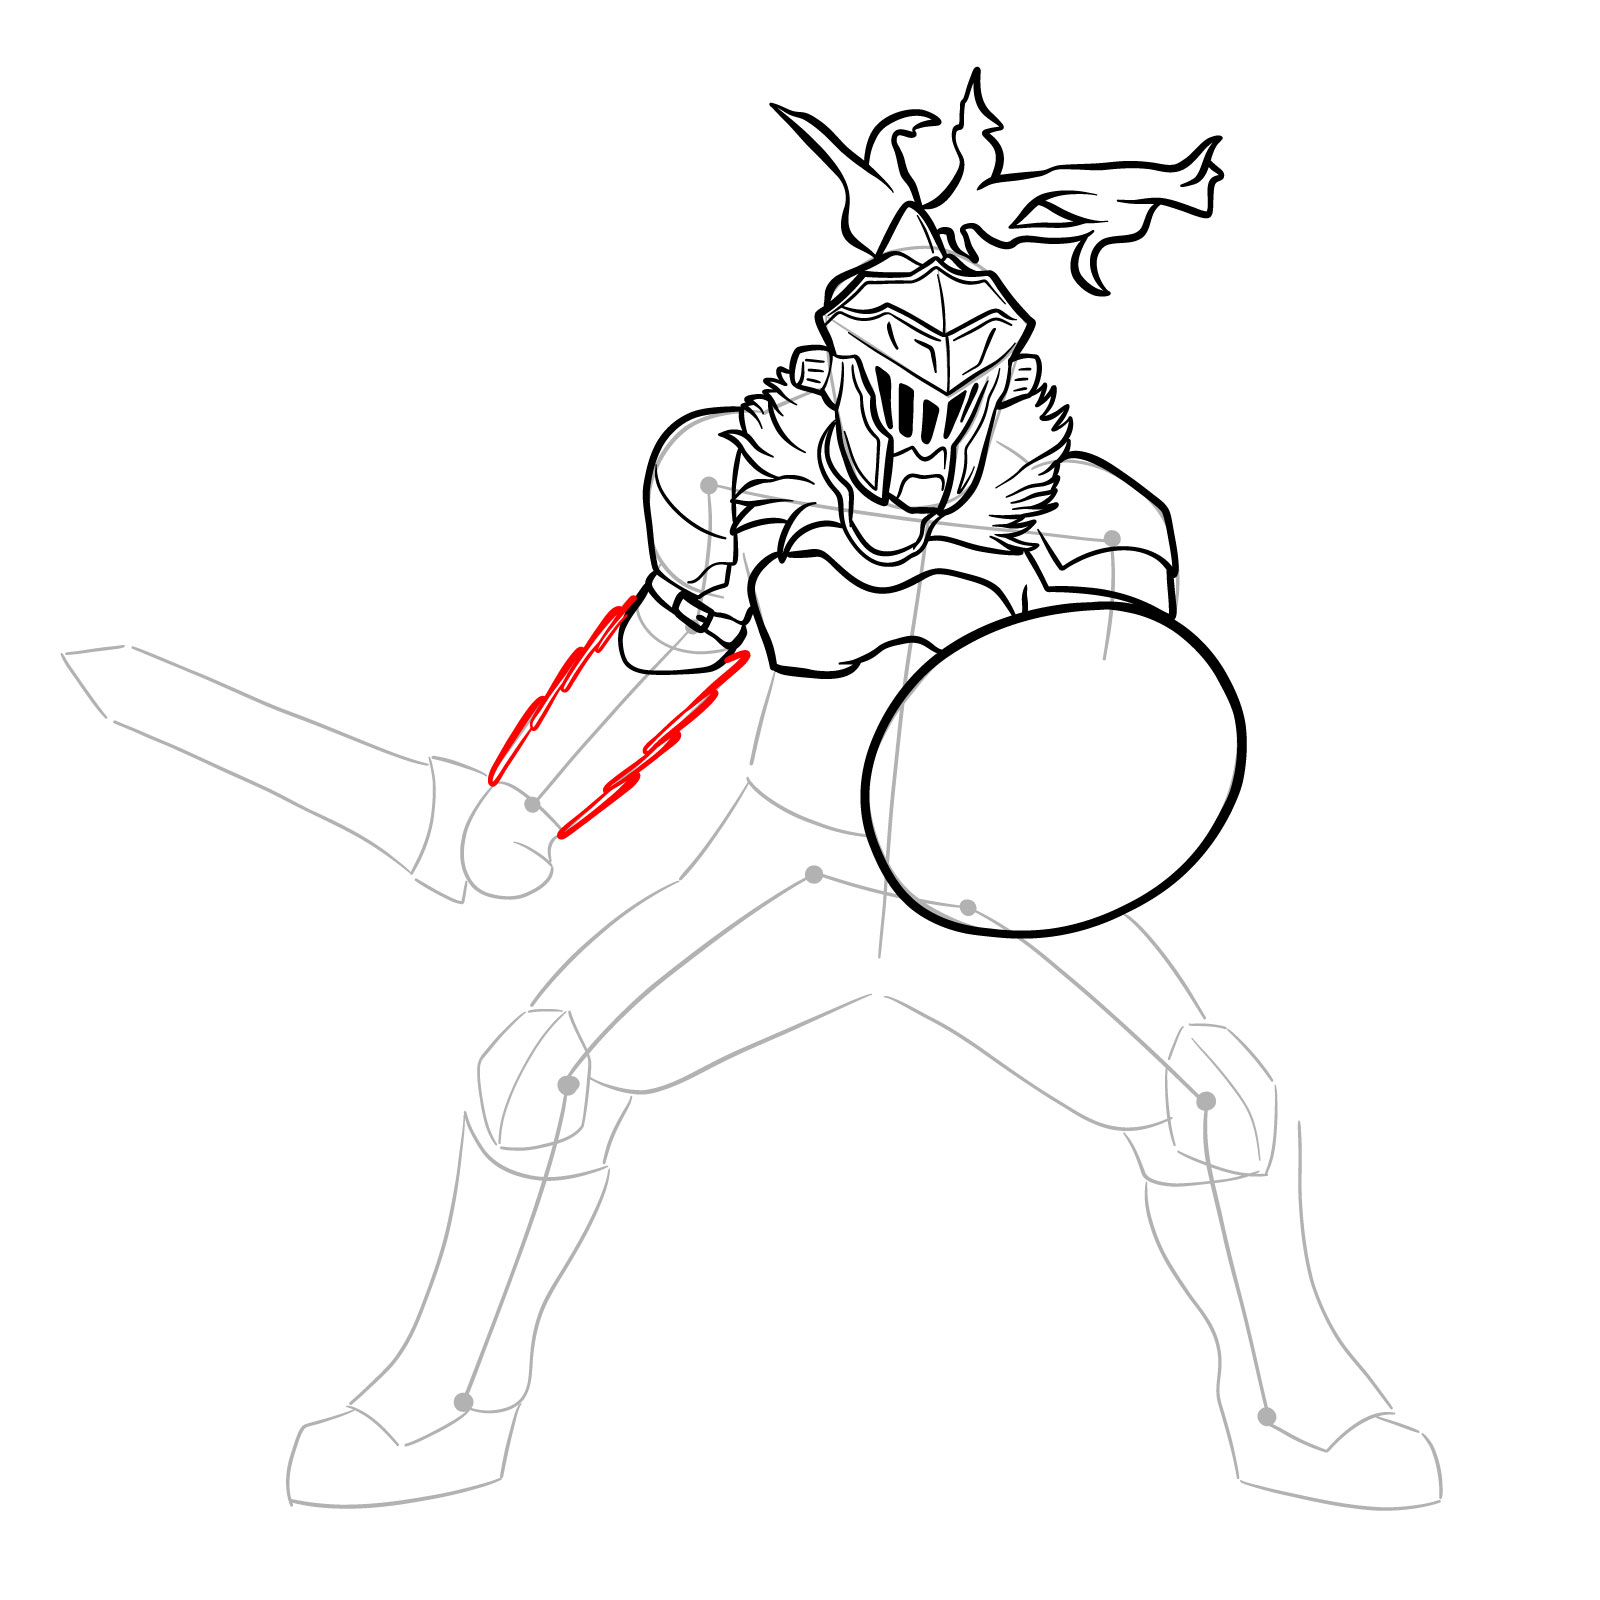 How to Draw Goblin Slayer in battle stance - step 19